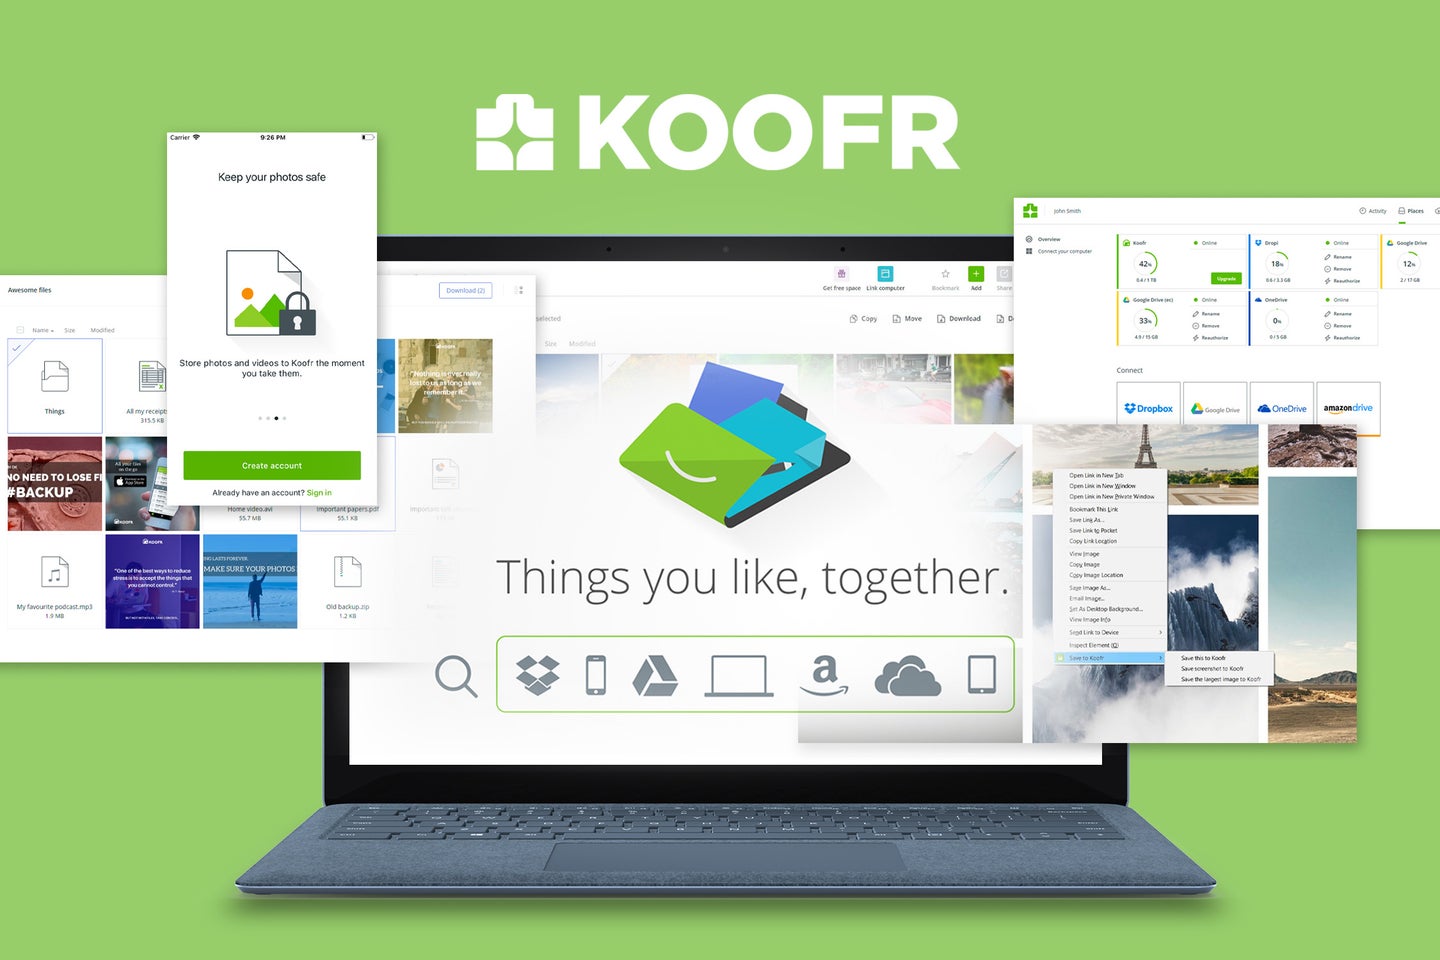 A advert for Koofr cloud storage on a green background